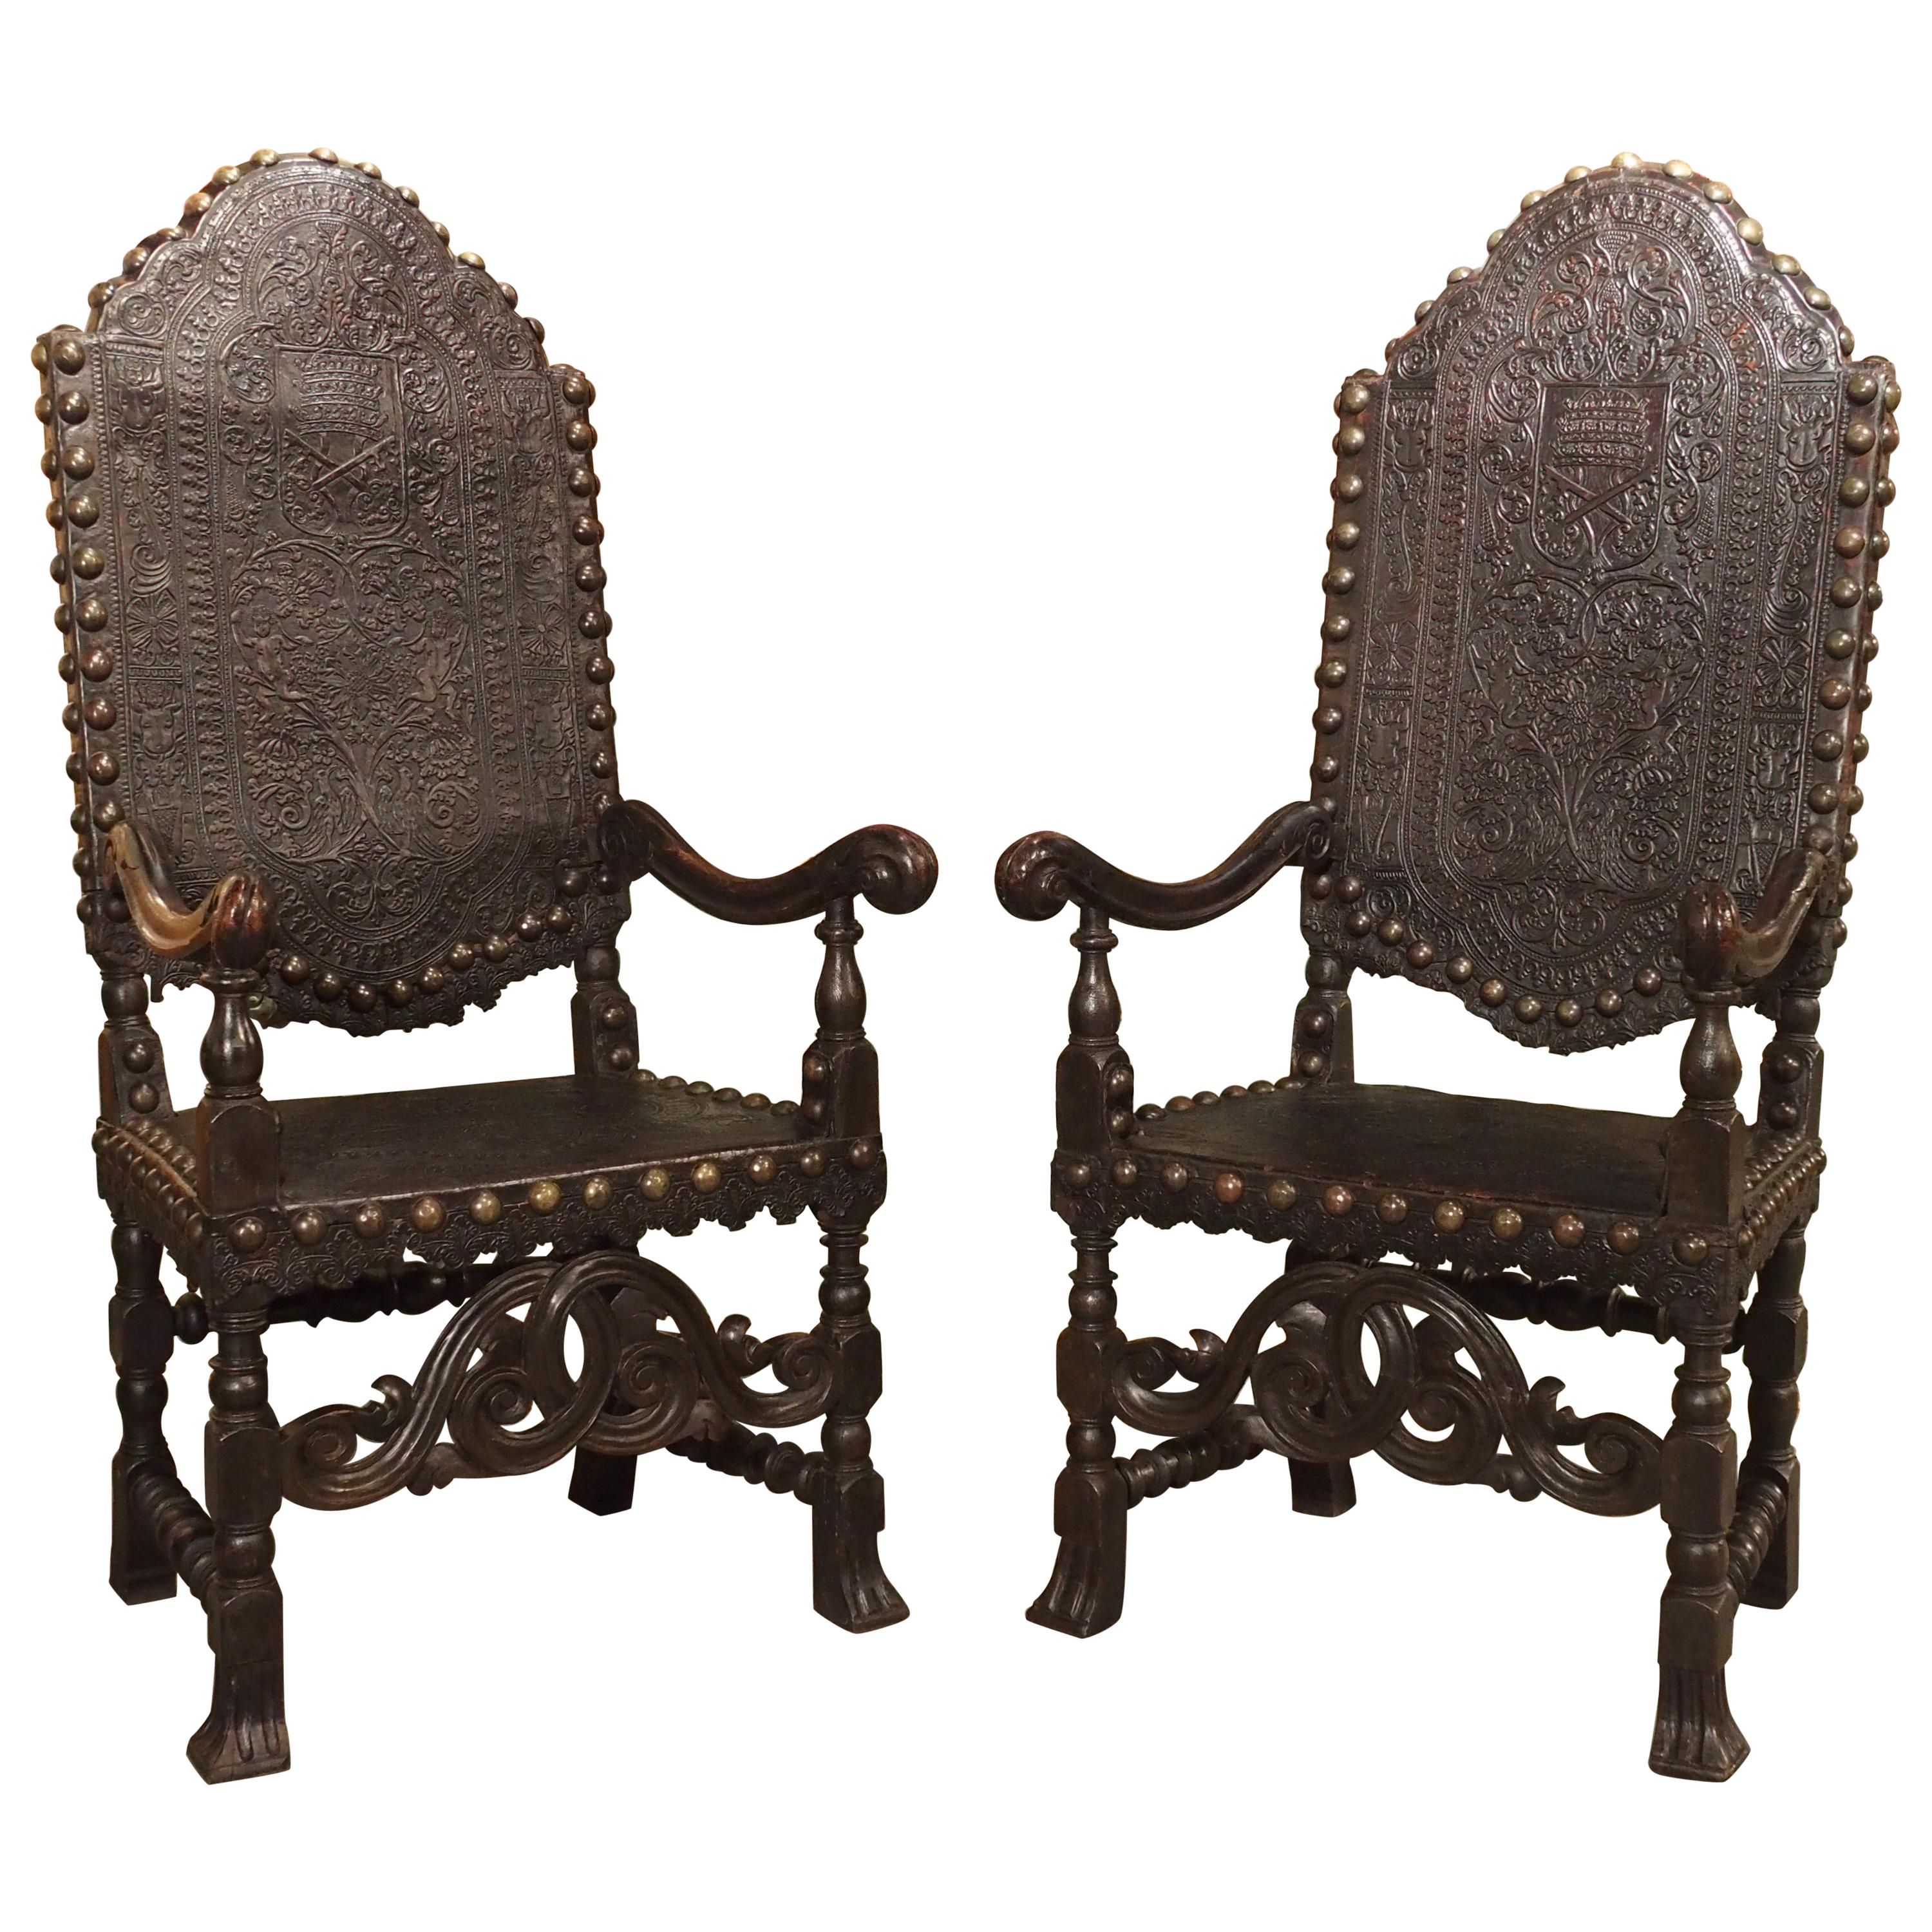 Pair of Antique Tooled Leather and Oak Armchairs from Spain